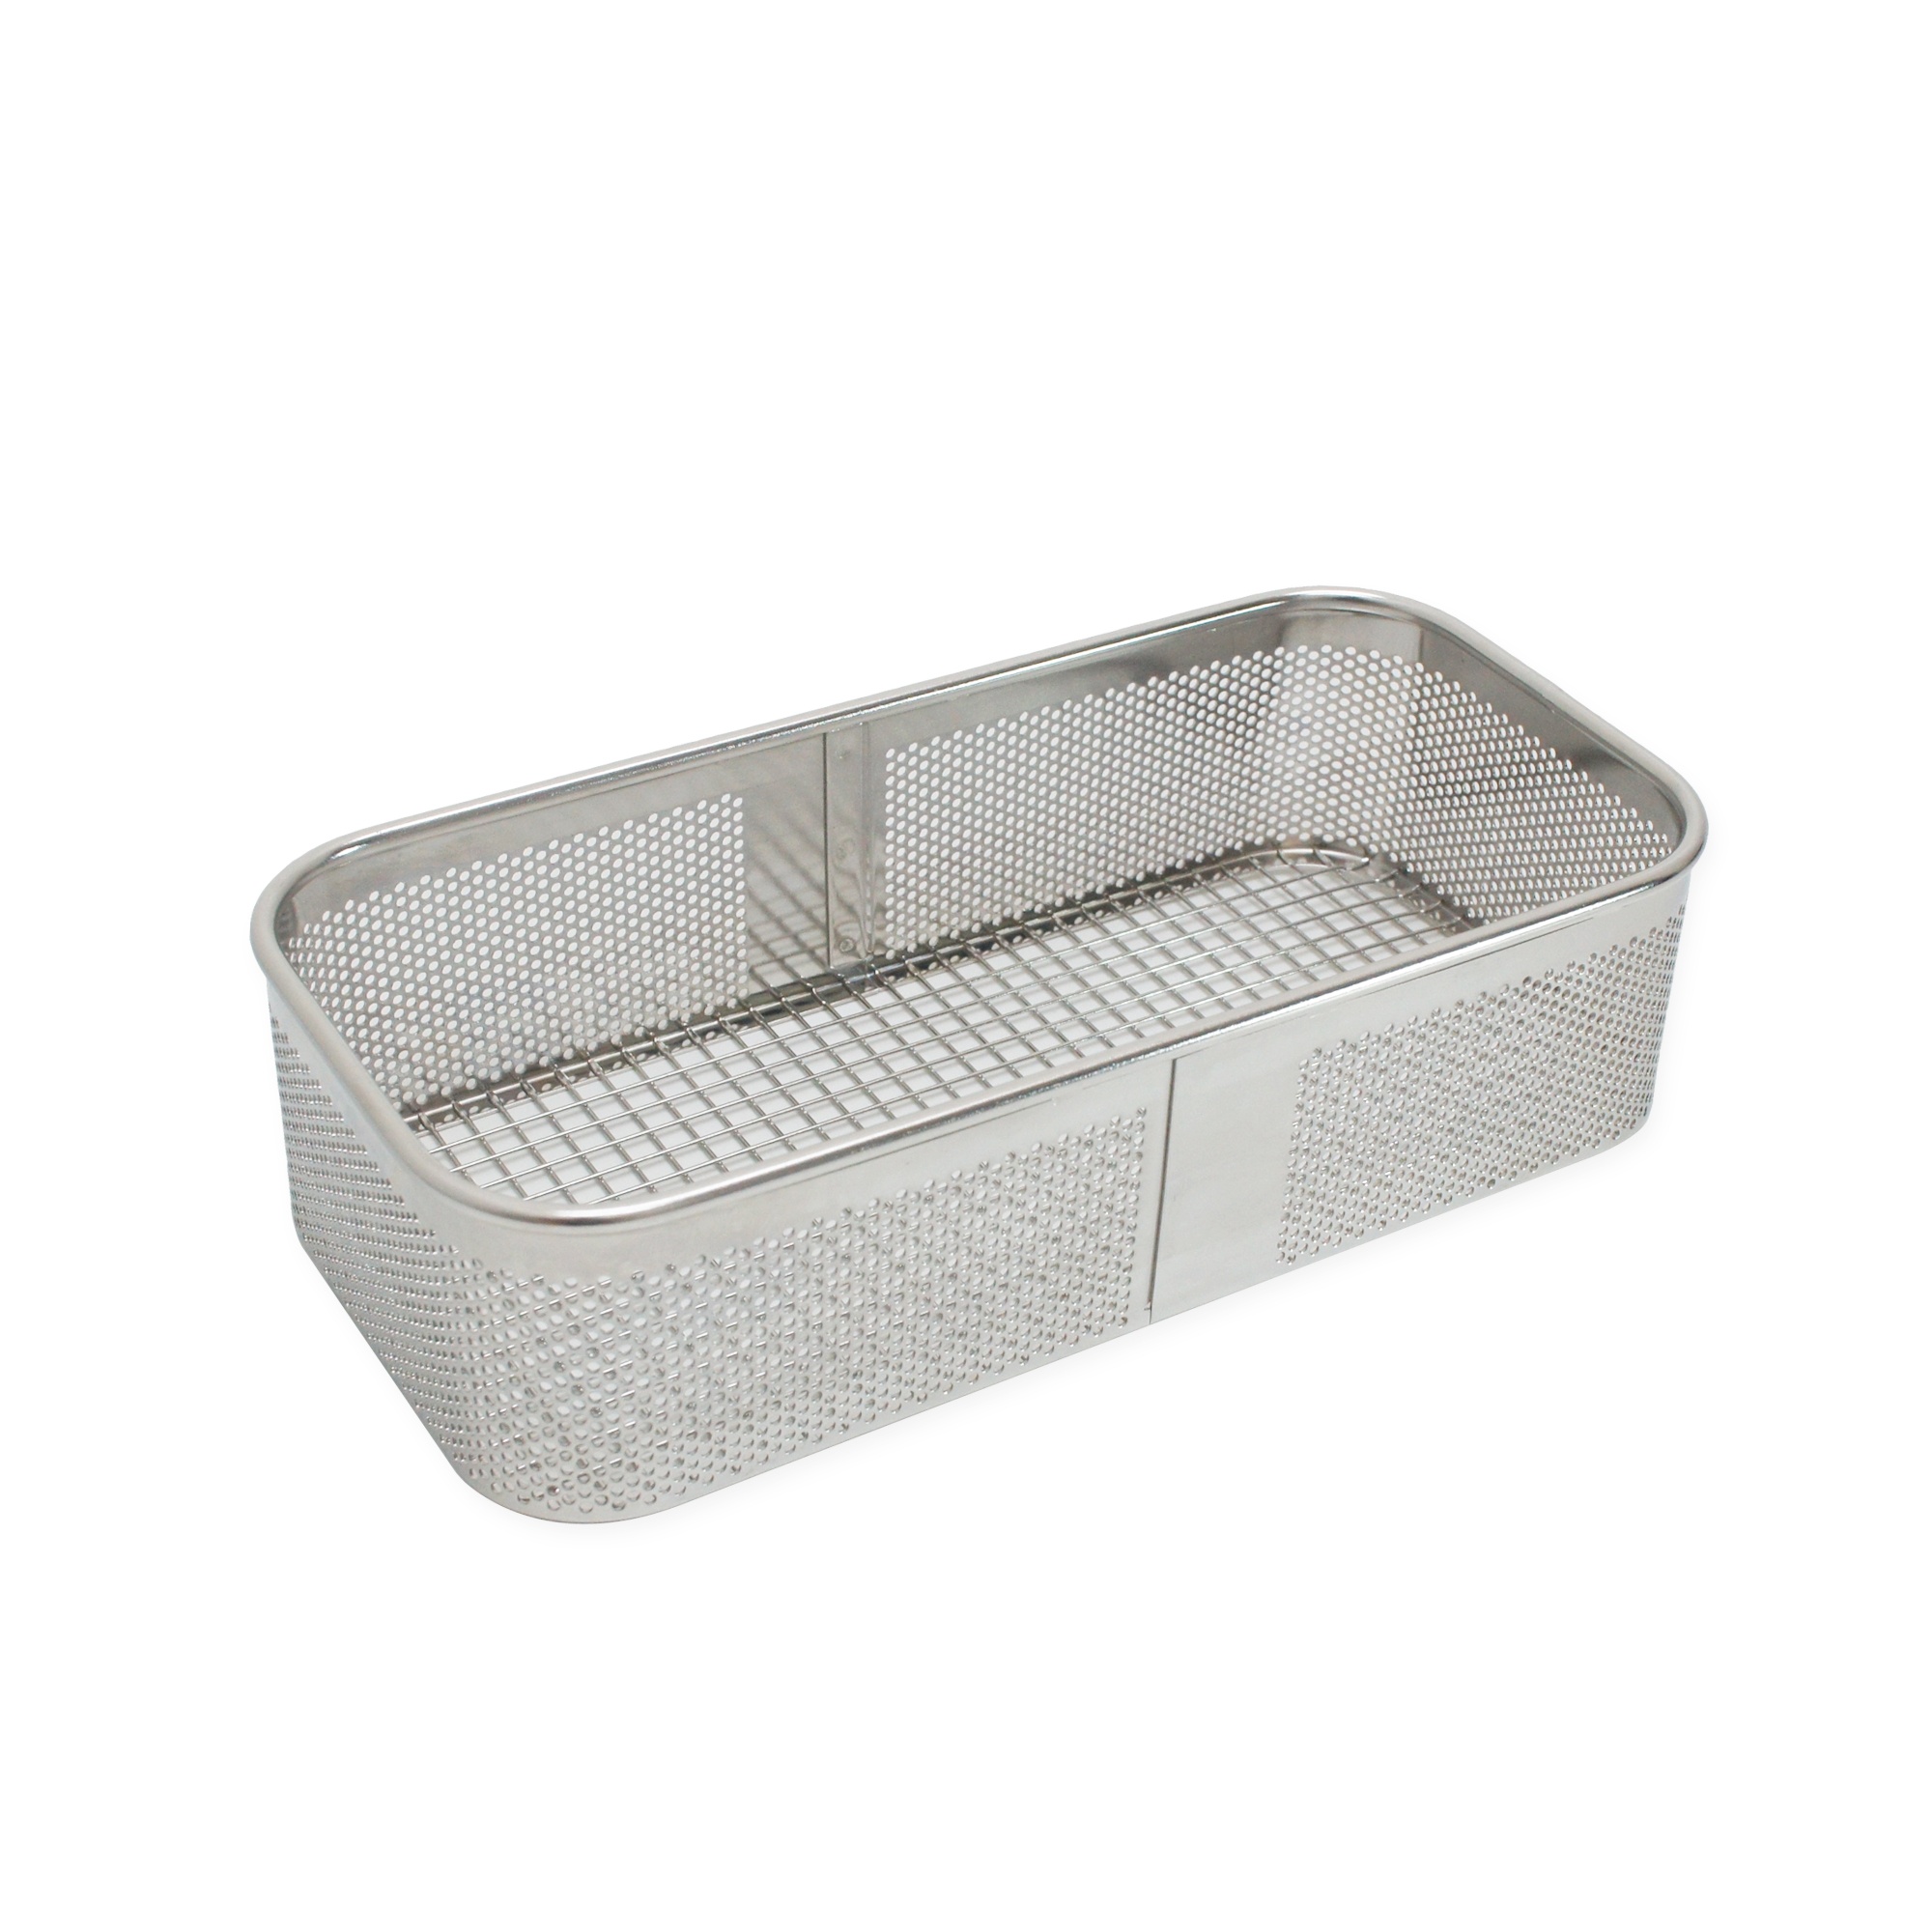 Perforated plate tray Image